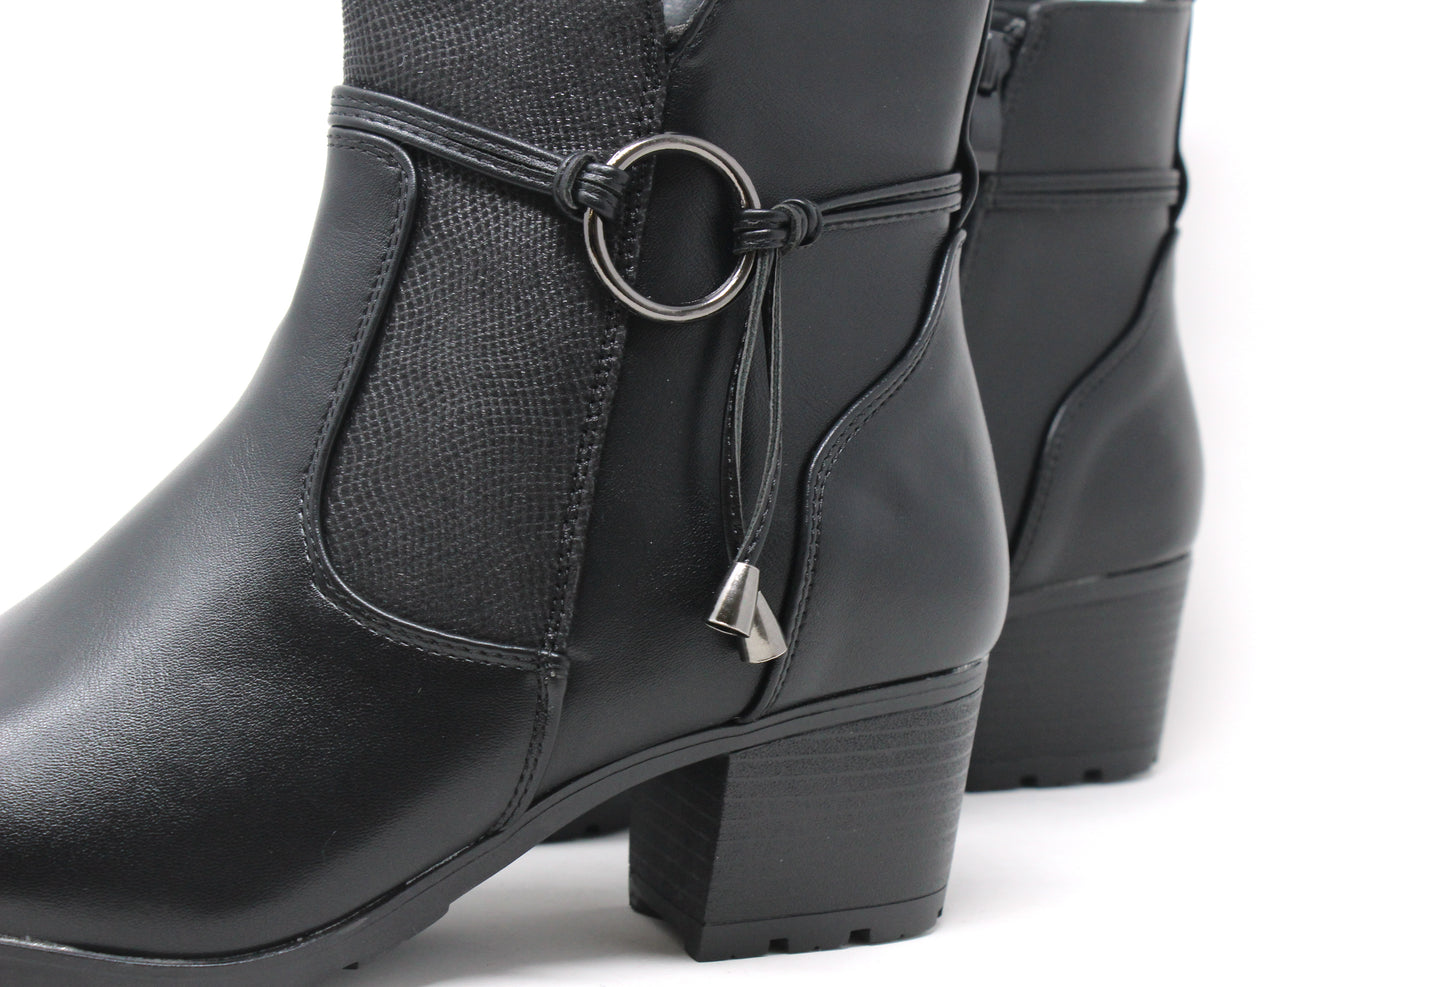 Ring Ankle Boot